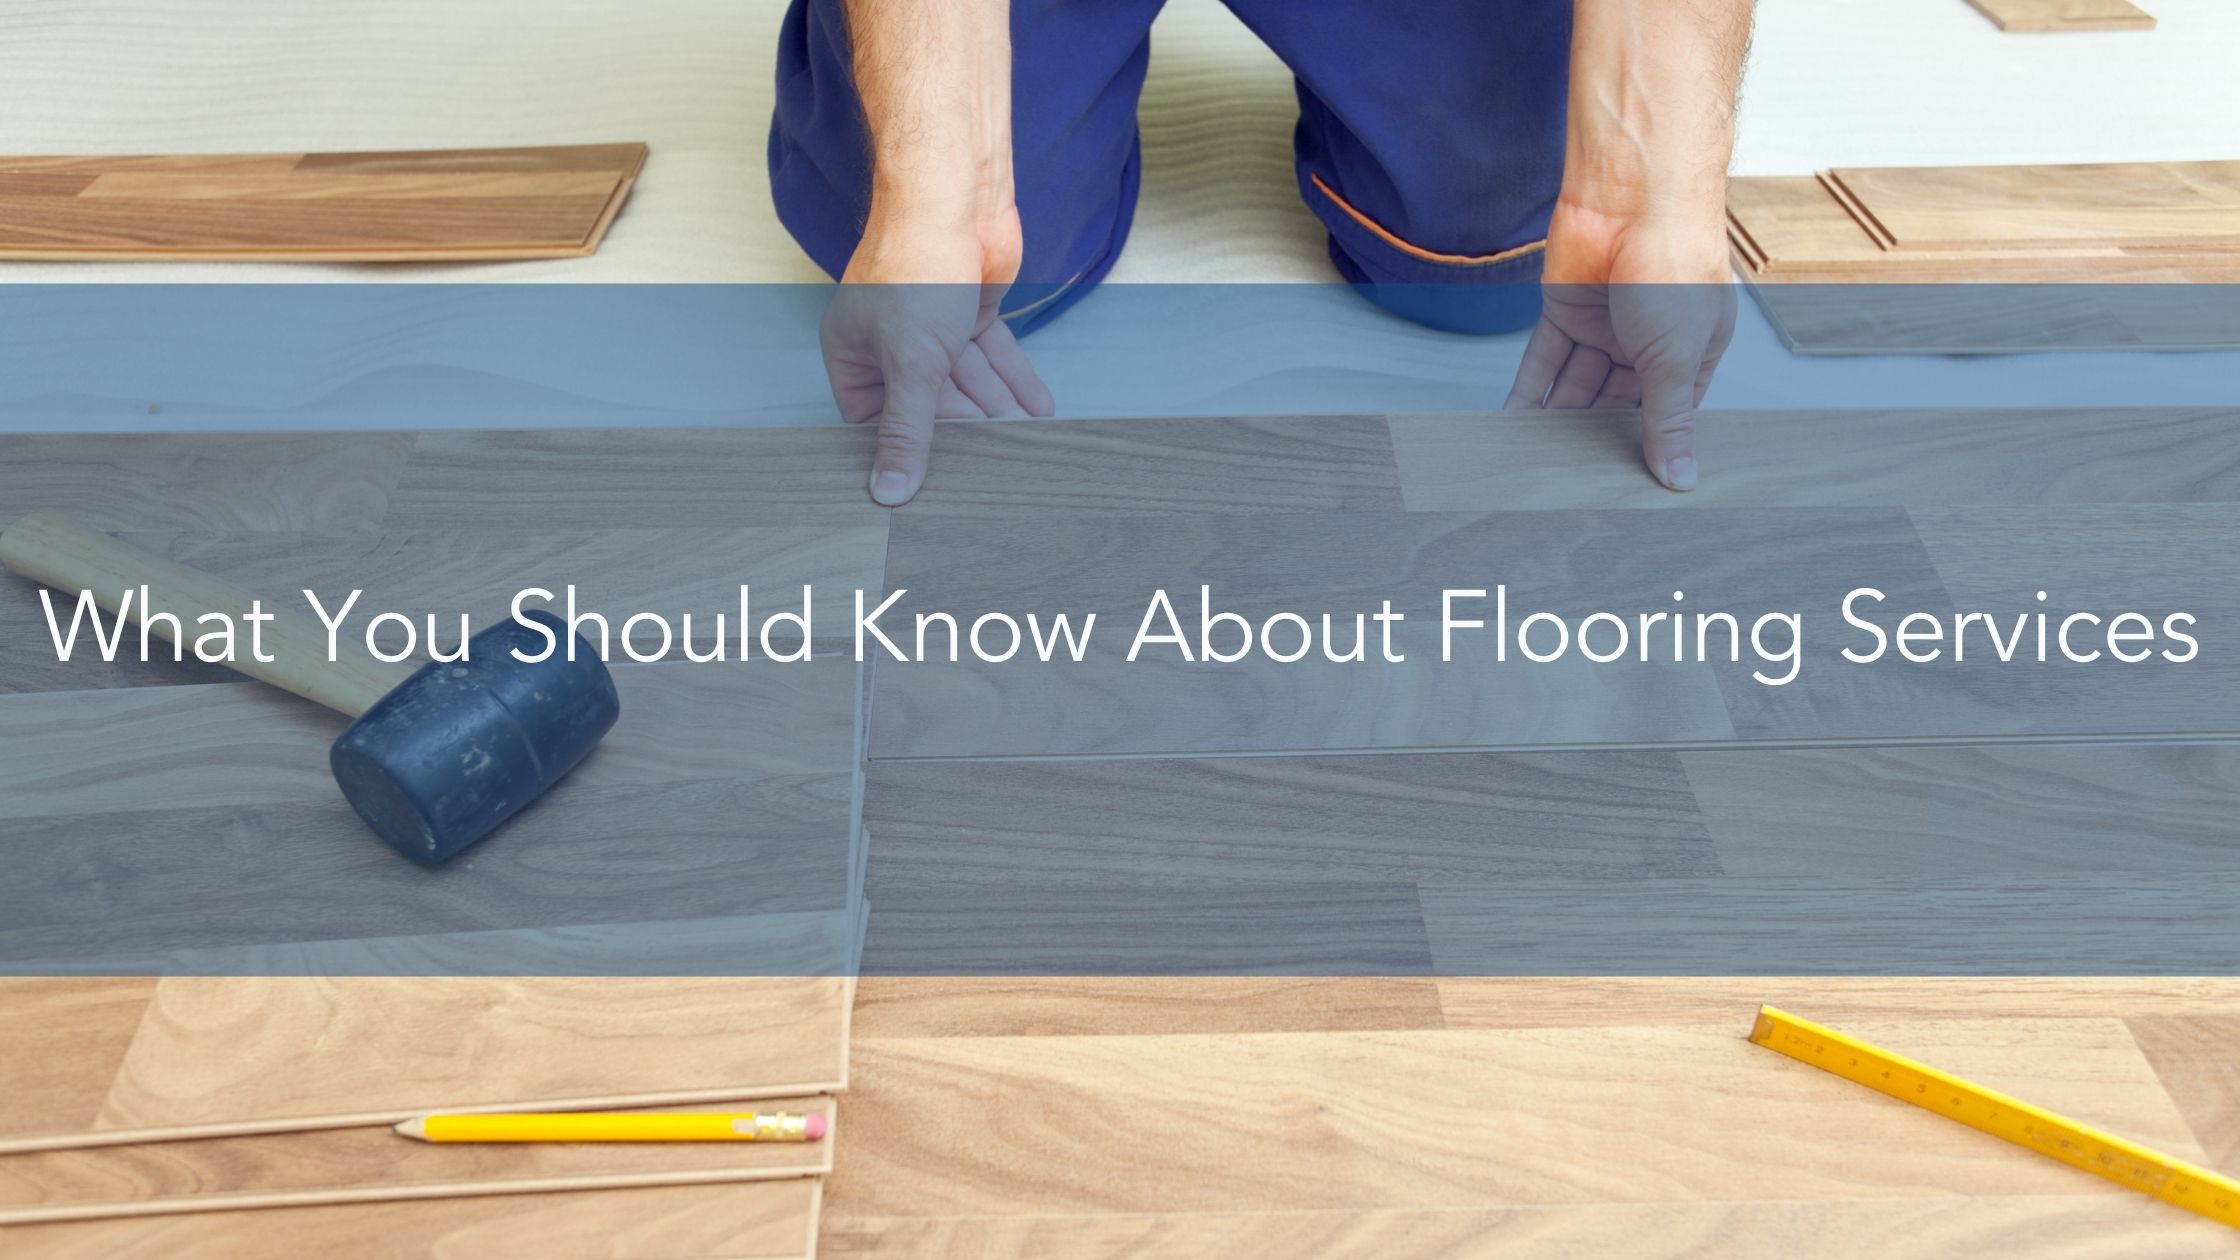 https://www.handymanconnection.net/wp-content/uploads/2021/11/What-You-Should-Know-About-Flooring-Services.jpg